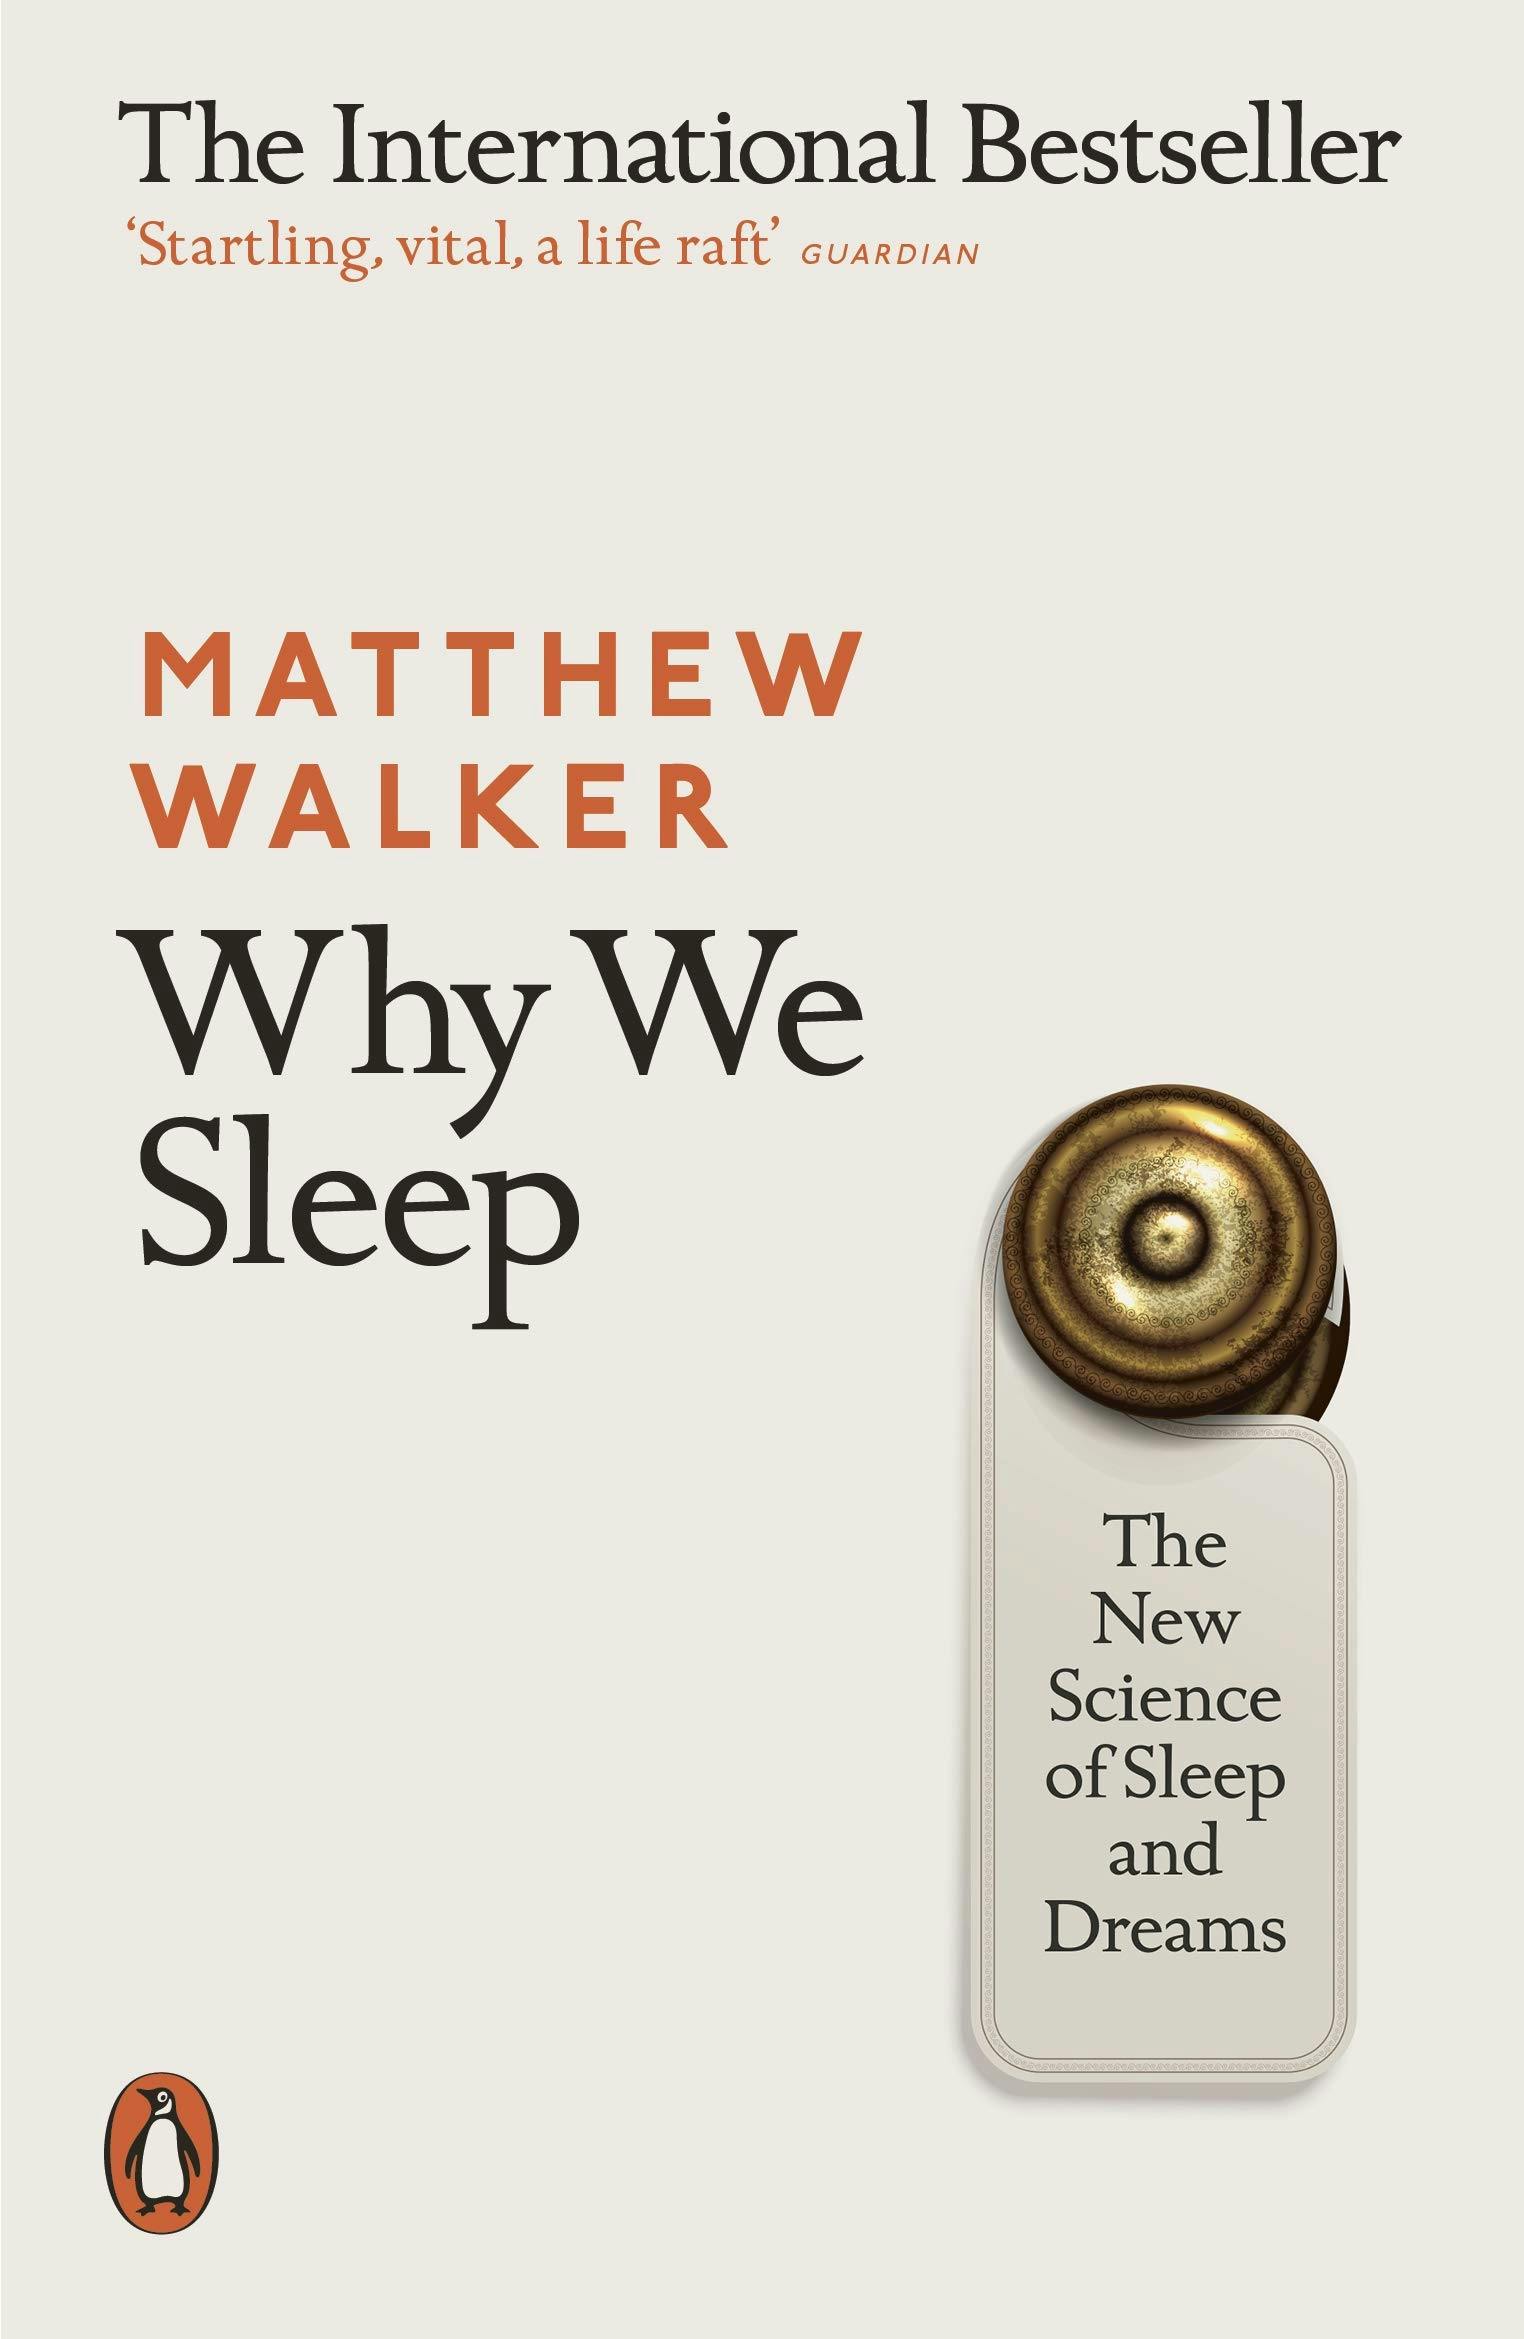 The media cover for “Why We Sleep” by Matthew Walker